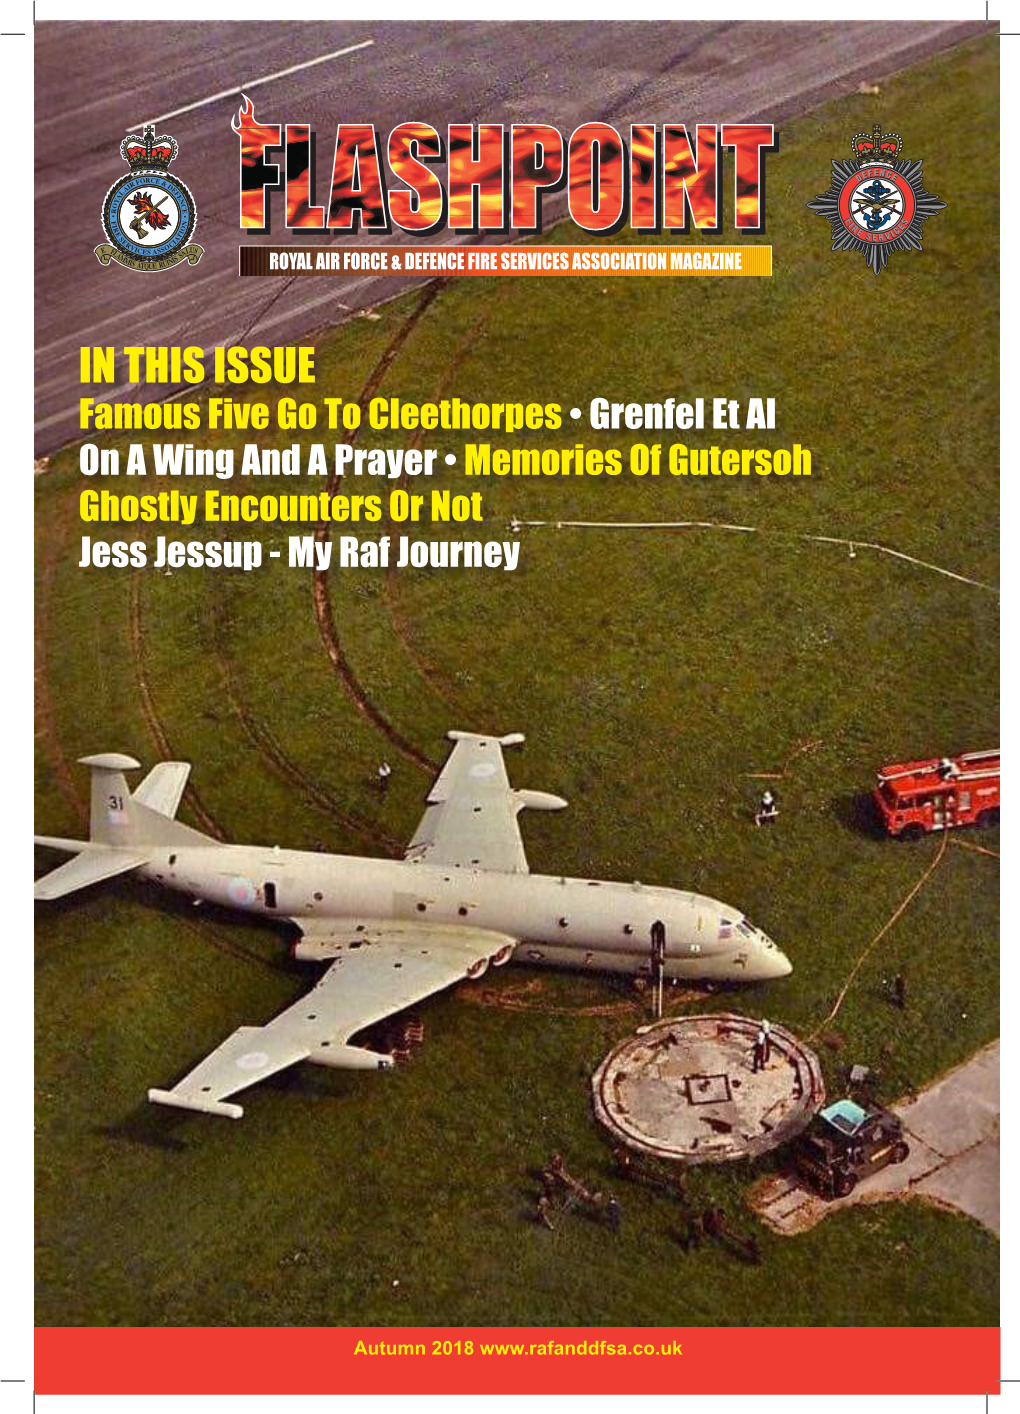 IN THIS ISSUE Famous Five Go to Cleethorpes • Grenfel Et Al on a Wing and a Prayer • Memories of Gutersoh Ghostly Encounters Or Not Jess Jessup - My Raf Journey